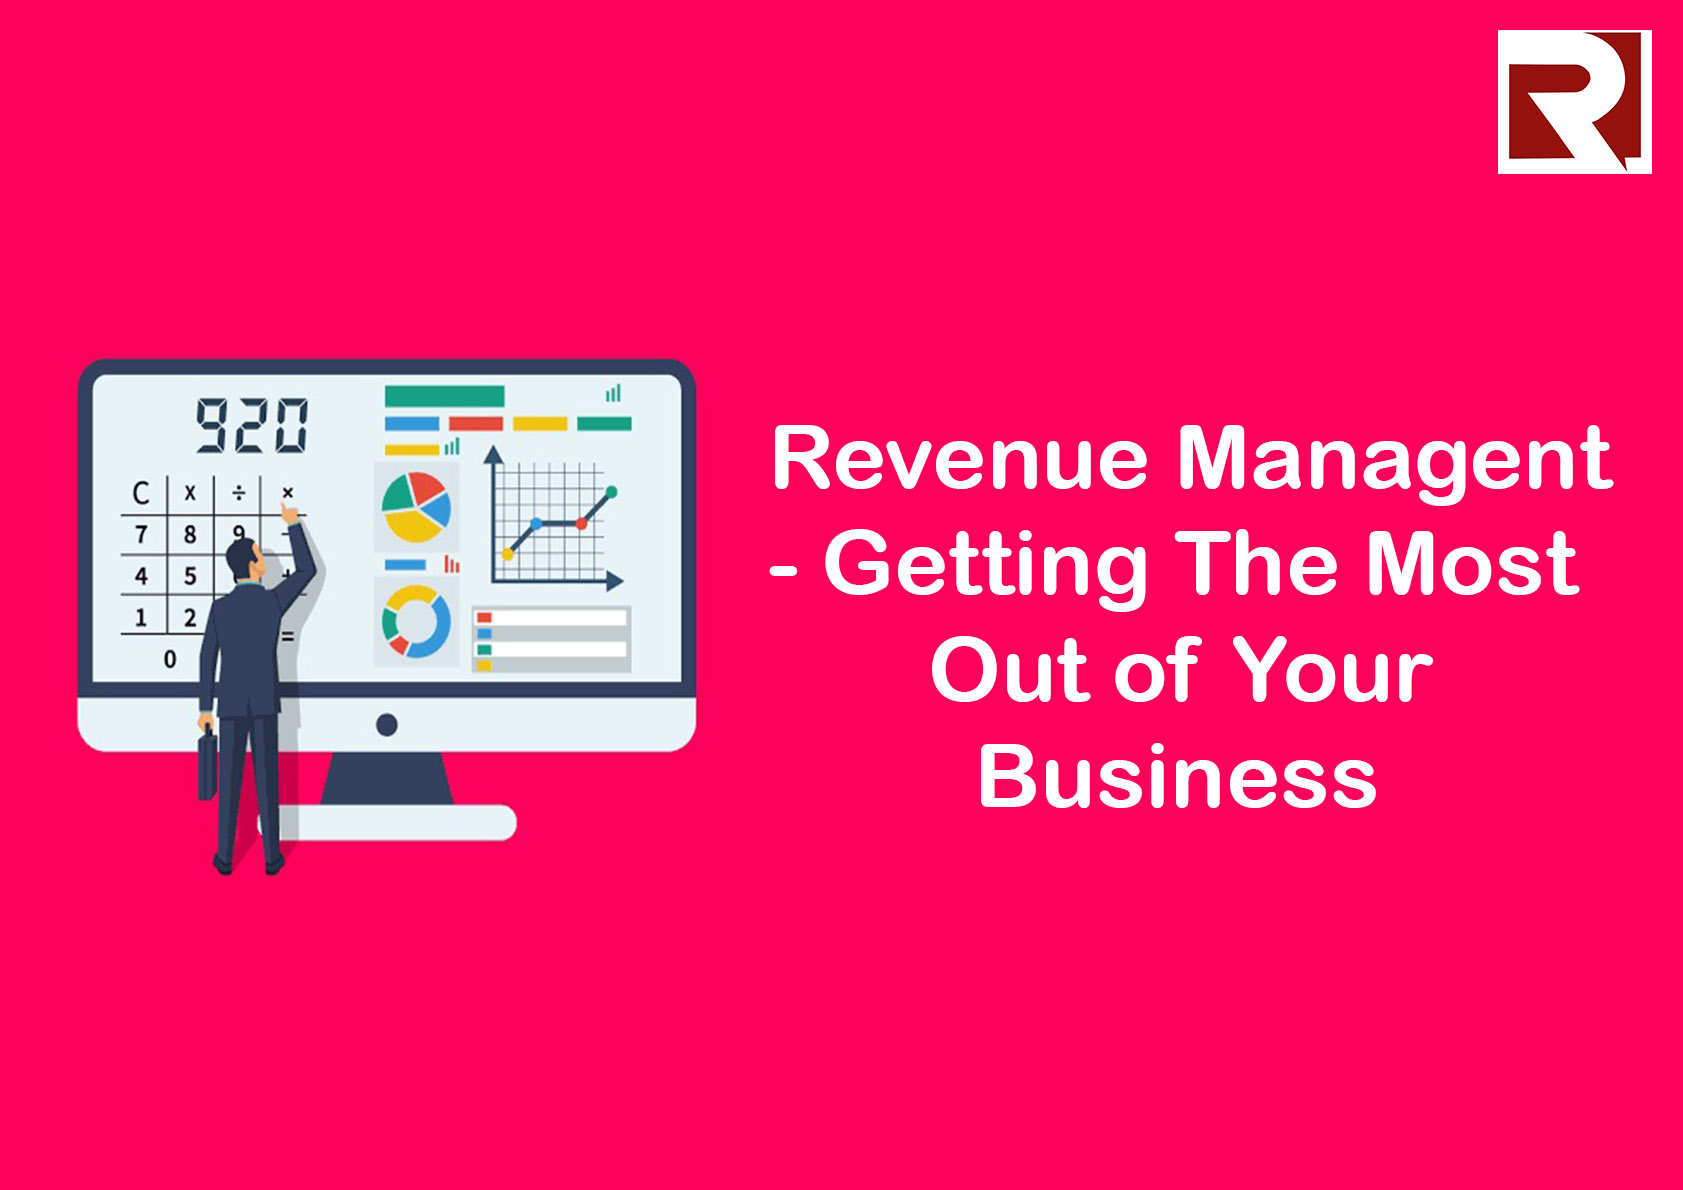 Revenue Management - Getting The Most Out Of Your Business